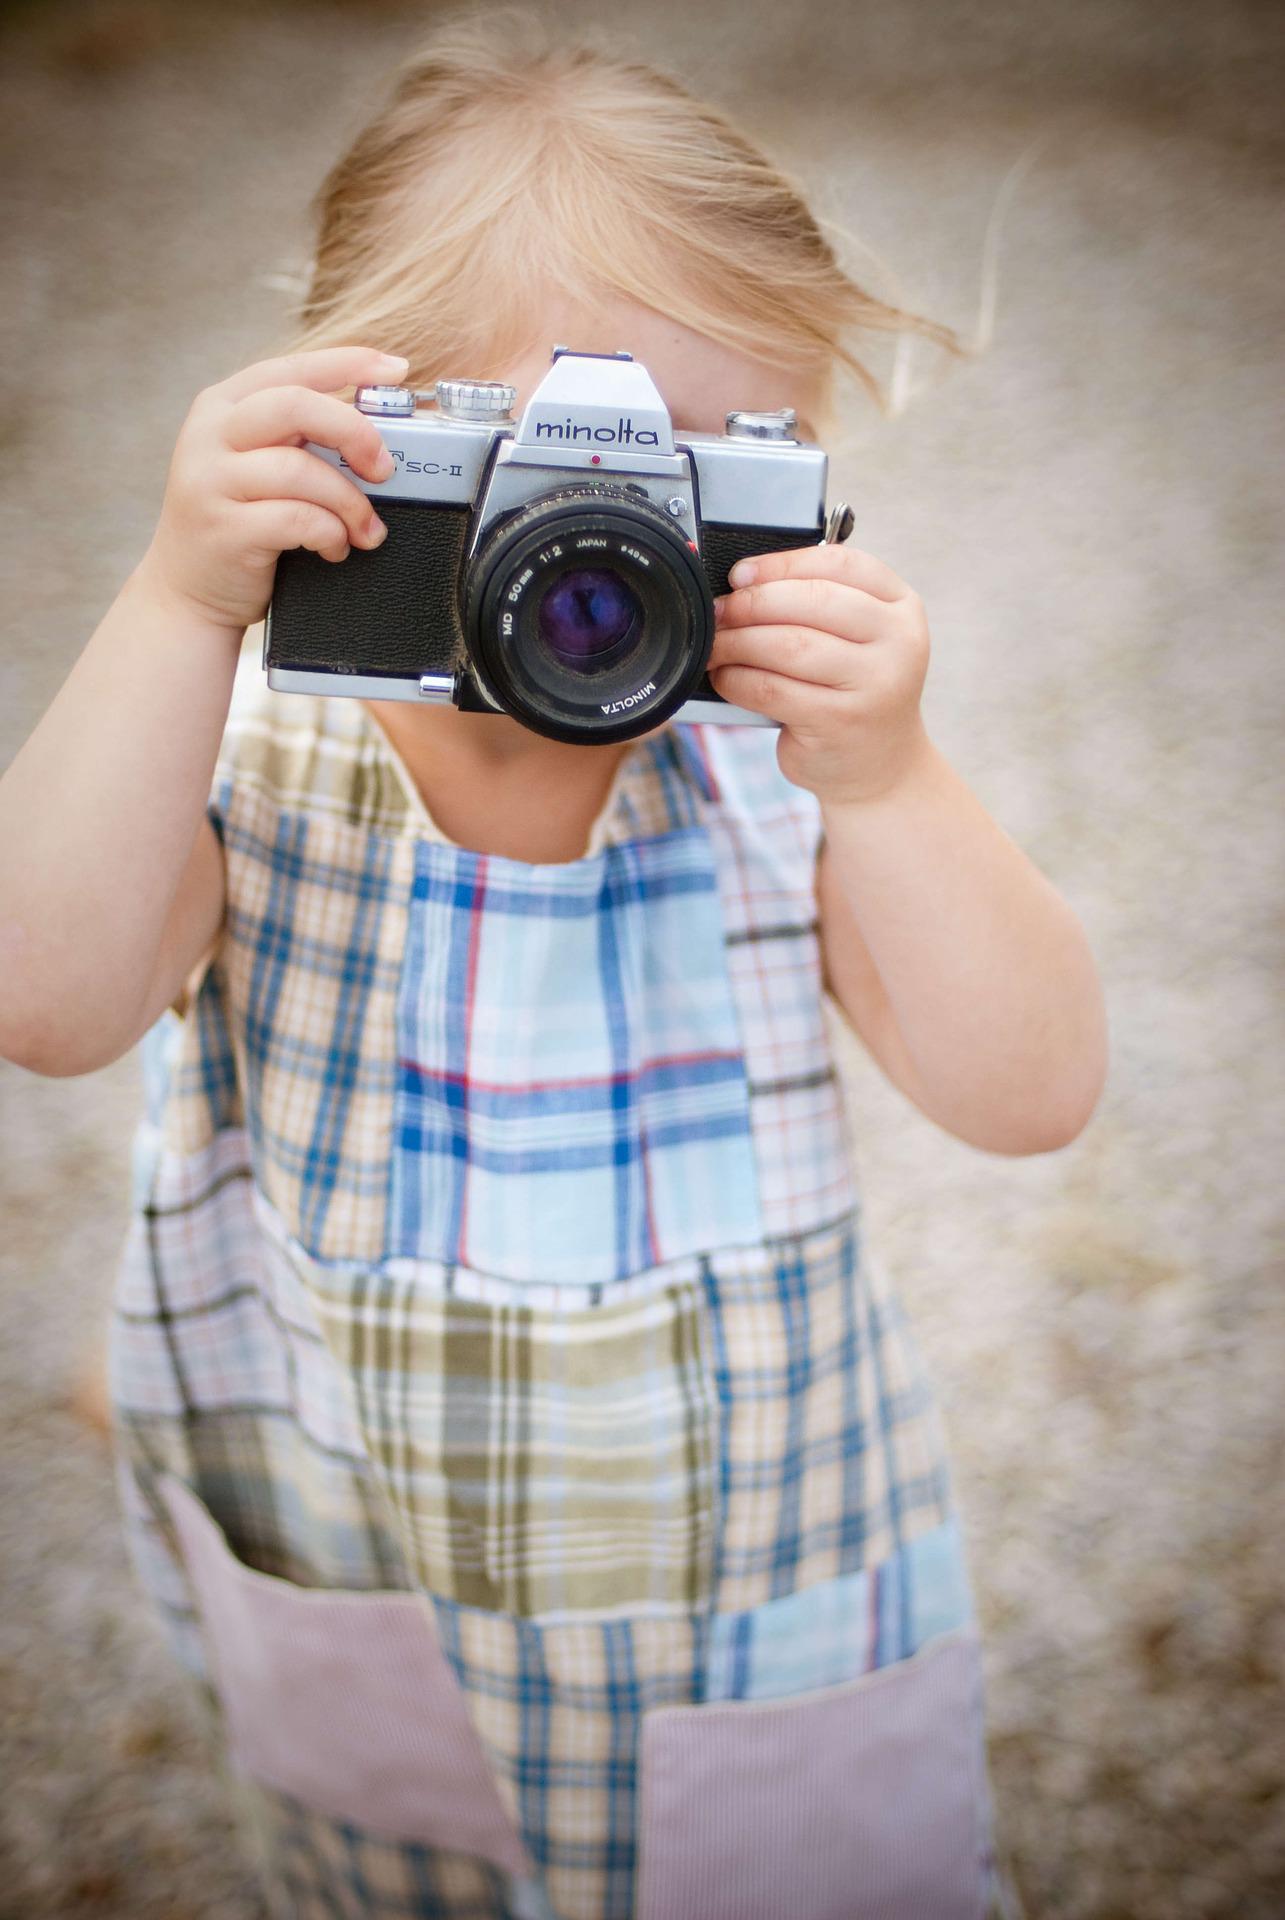 Unique Approaches to Documenting Your Child’s Life Through Family Videography